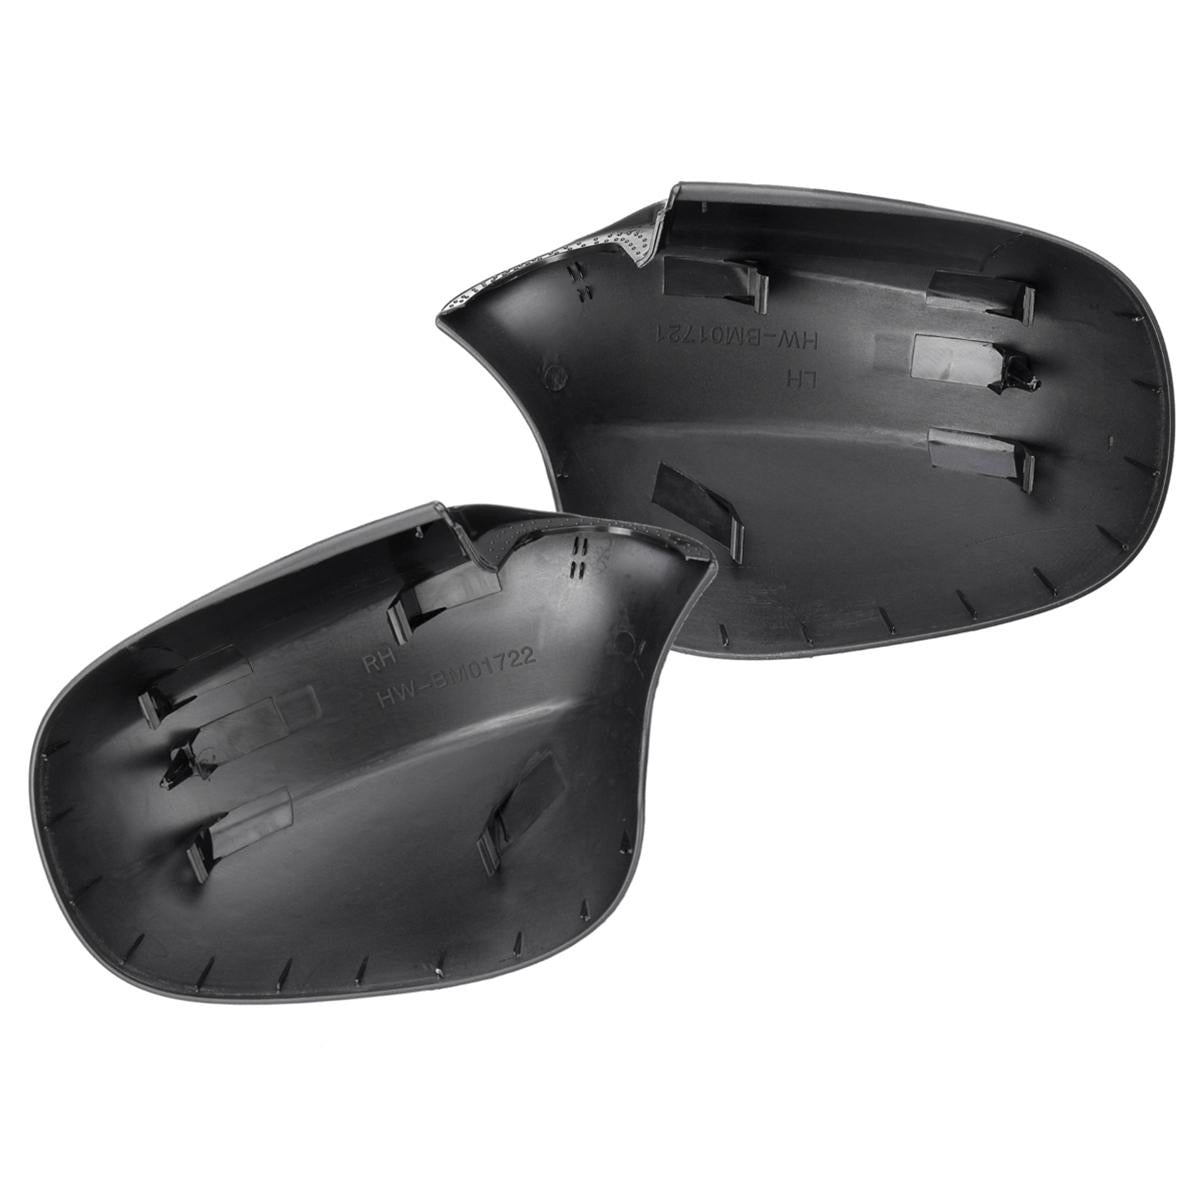 BMW E90 FACELIFT MIRROR COVERS